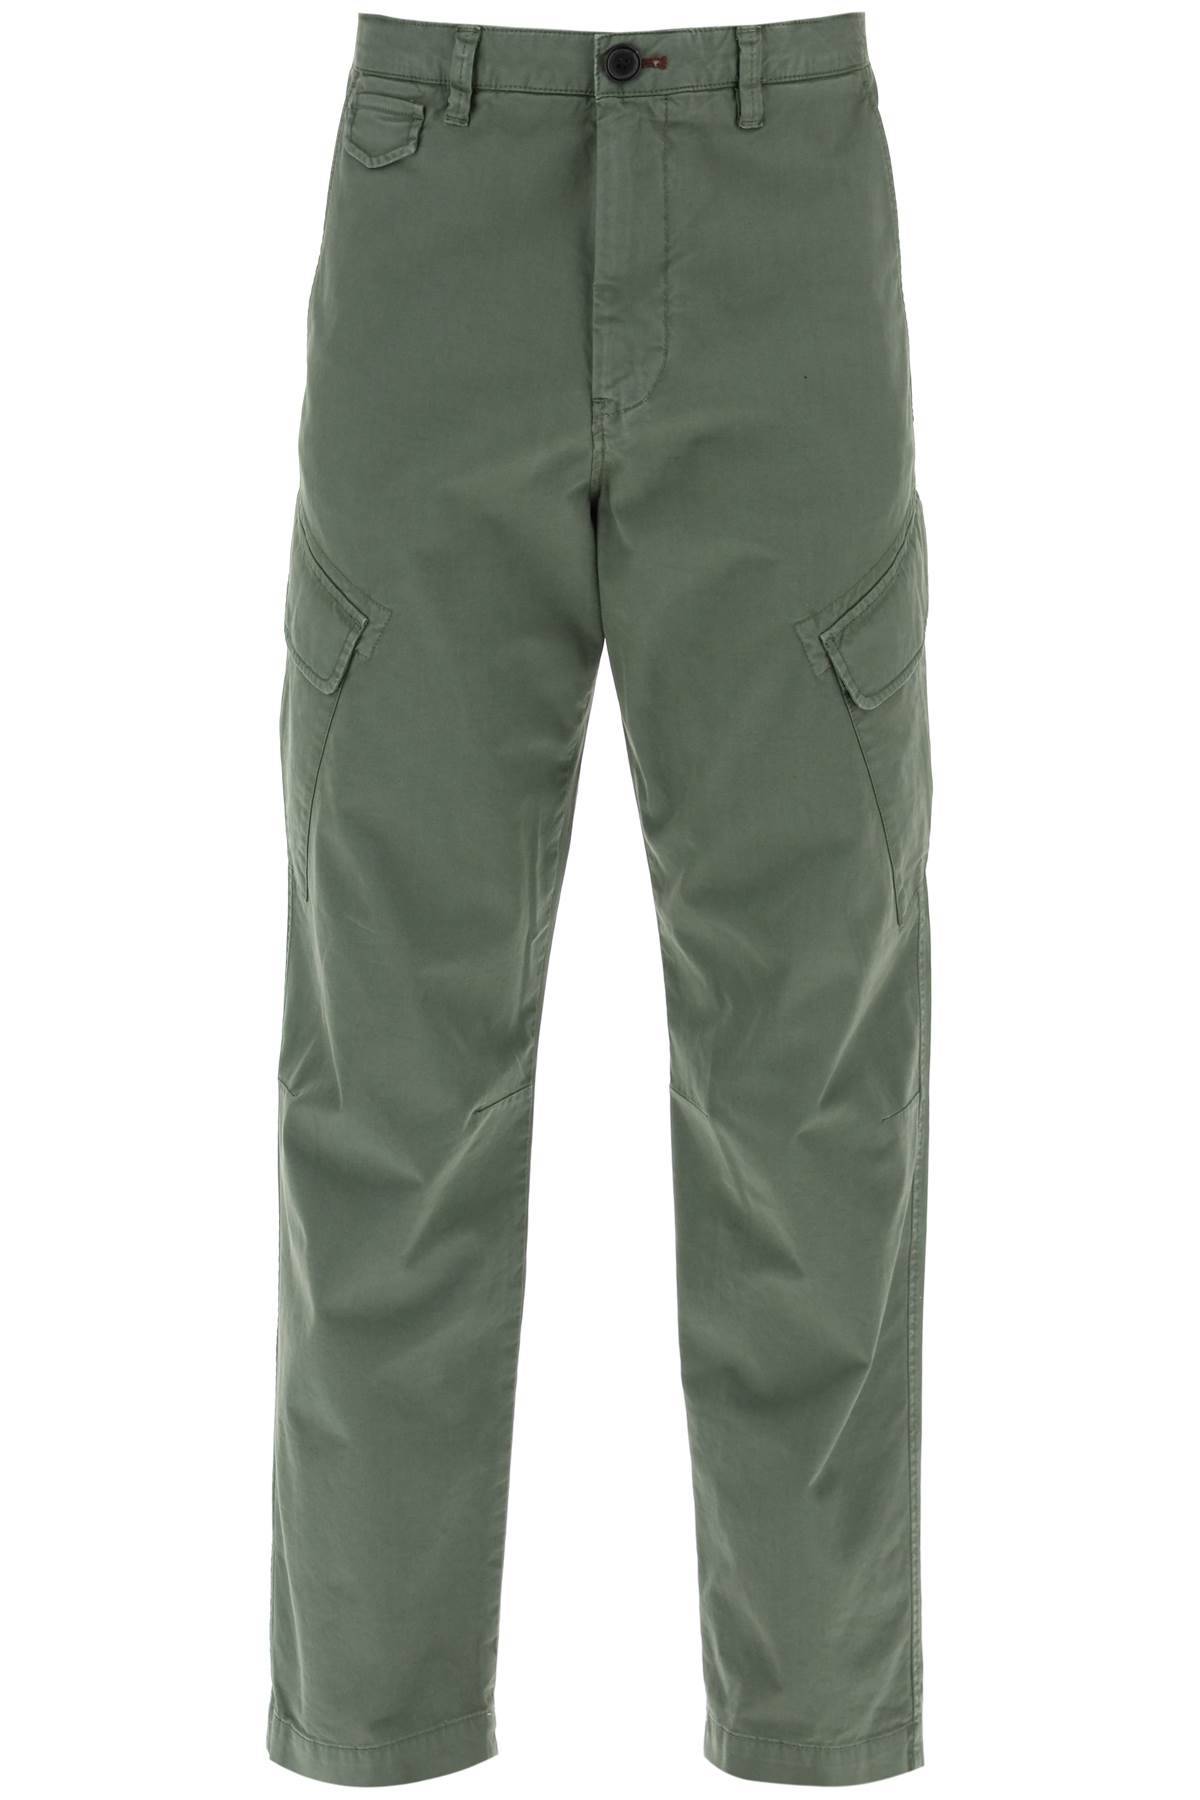 Ps Paul Smith PS PAUL SMITH stretch cotton cargo pants for men/w